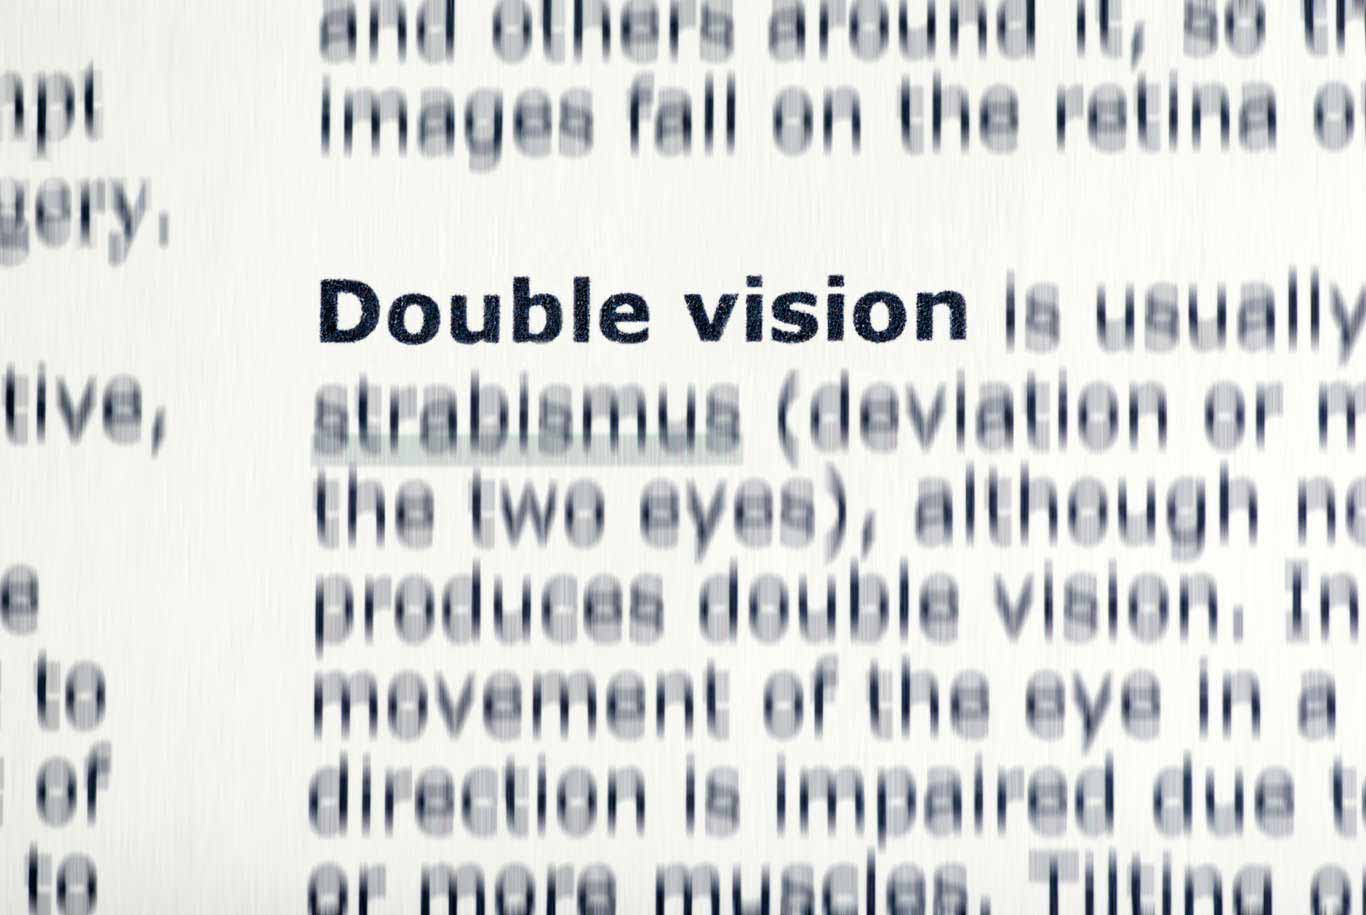 Vision Therapy Treatment for Double Vision, Causes of Double Vision